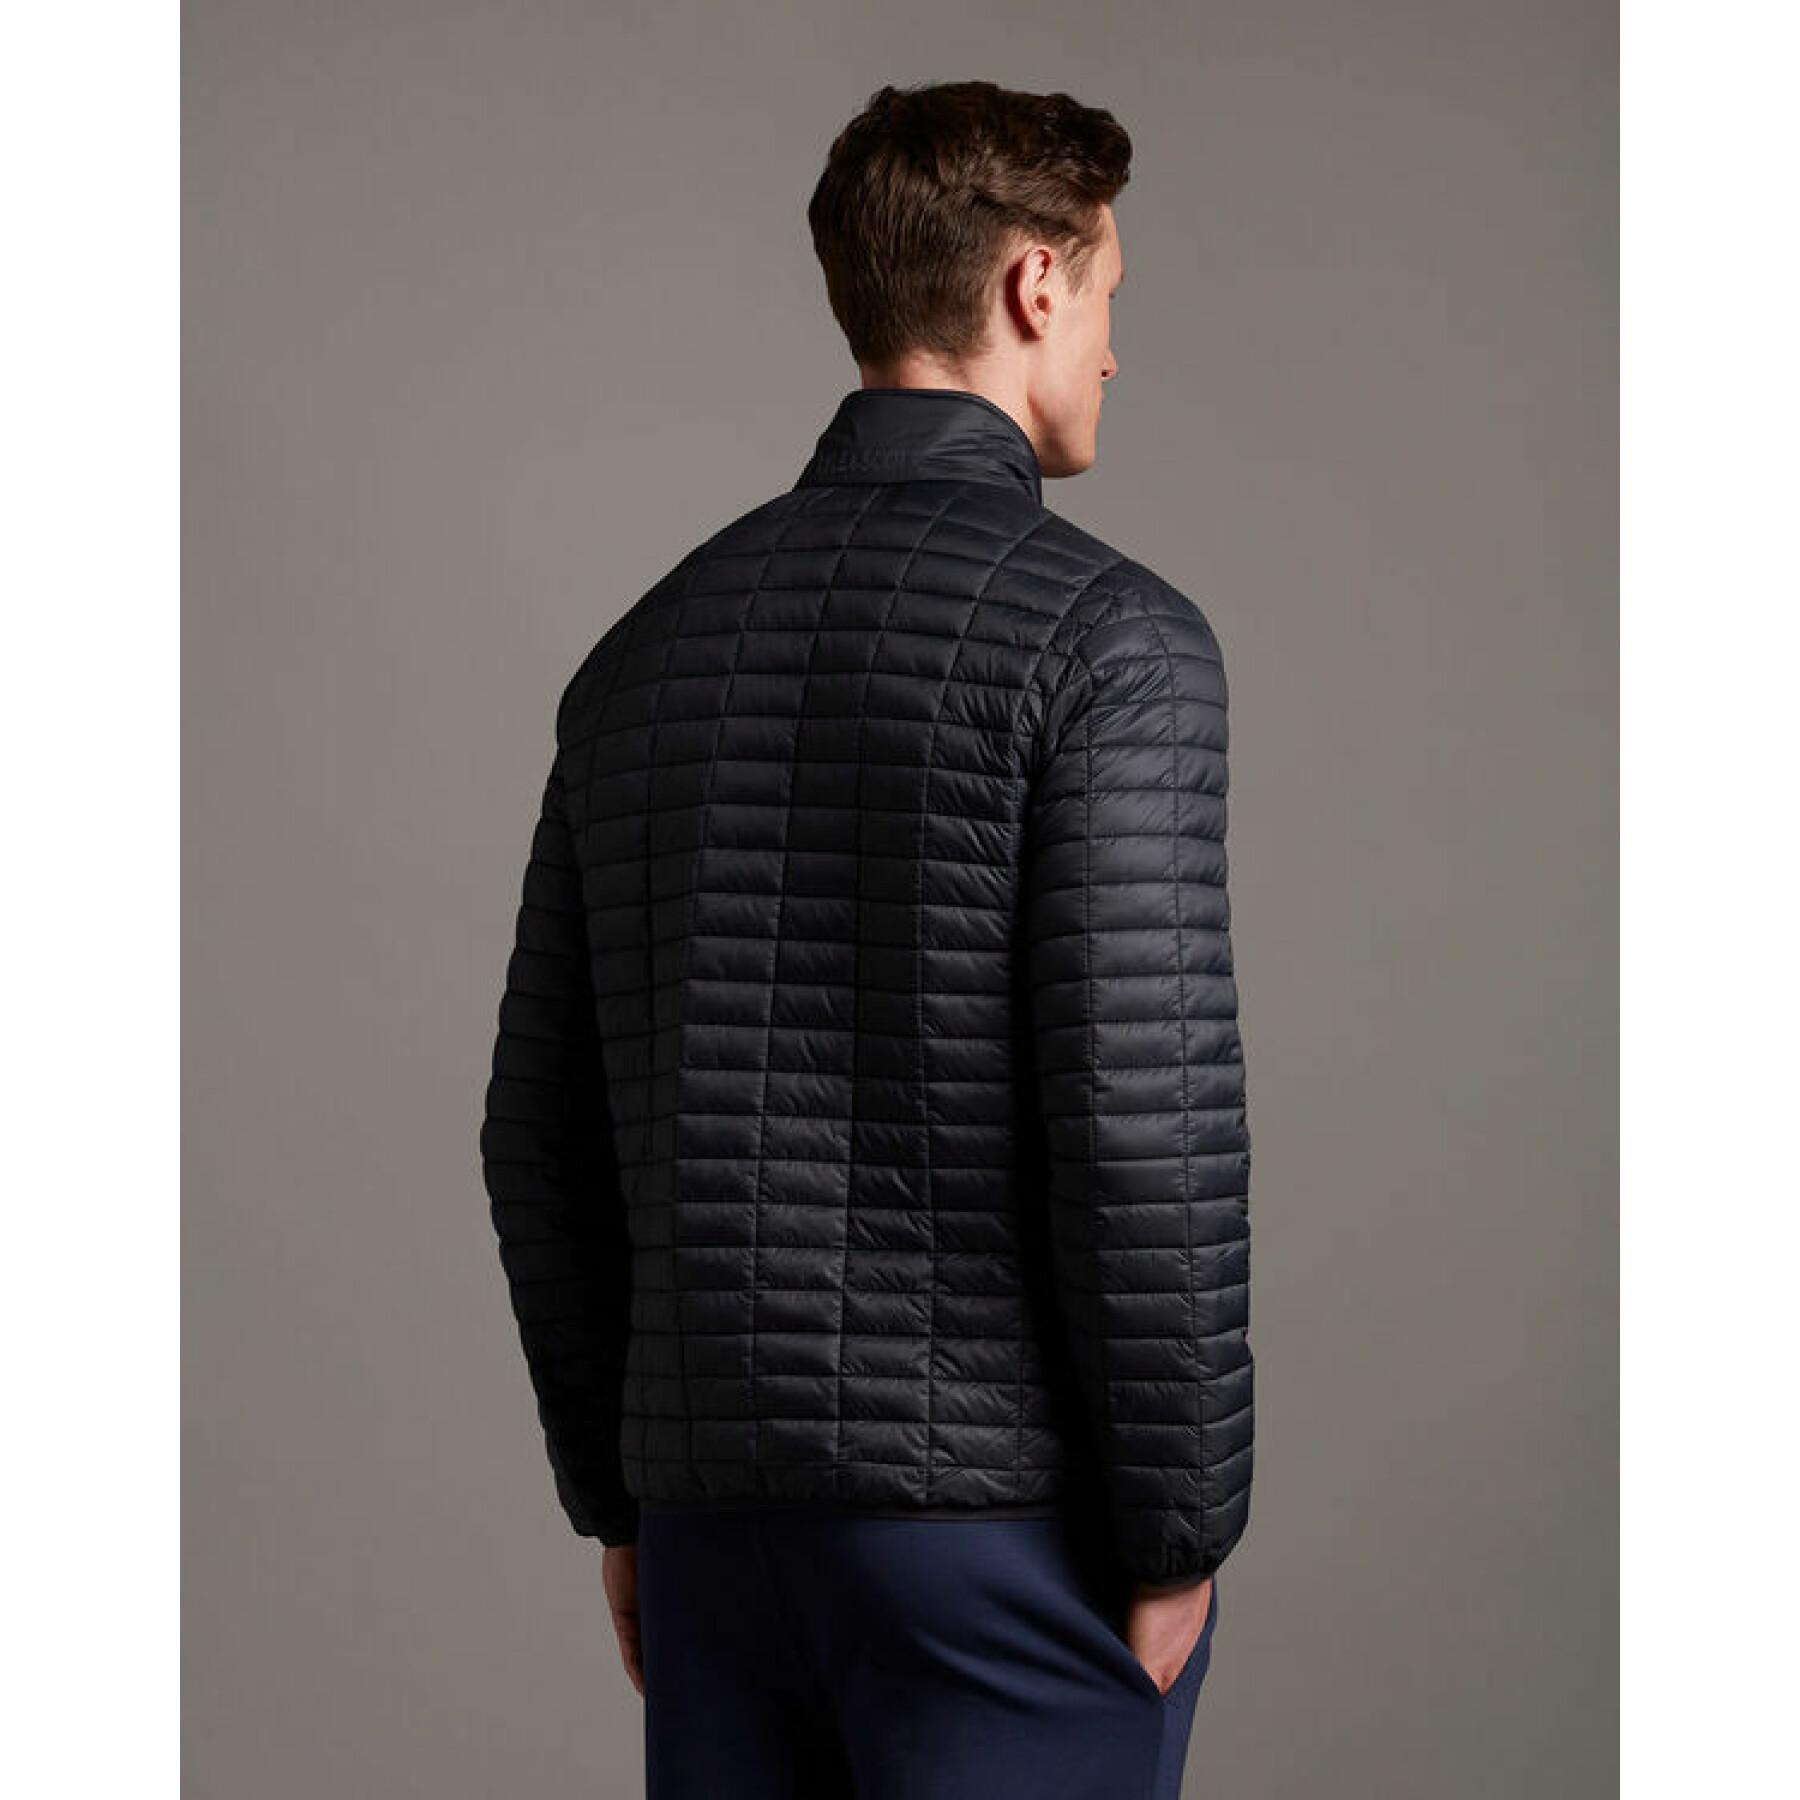 Champion block quilted jacket